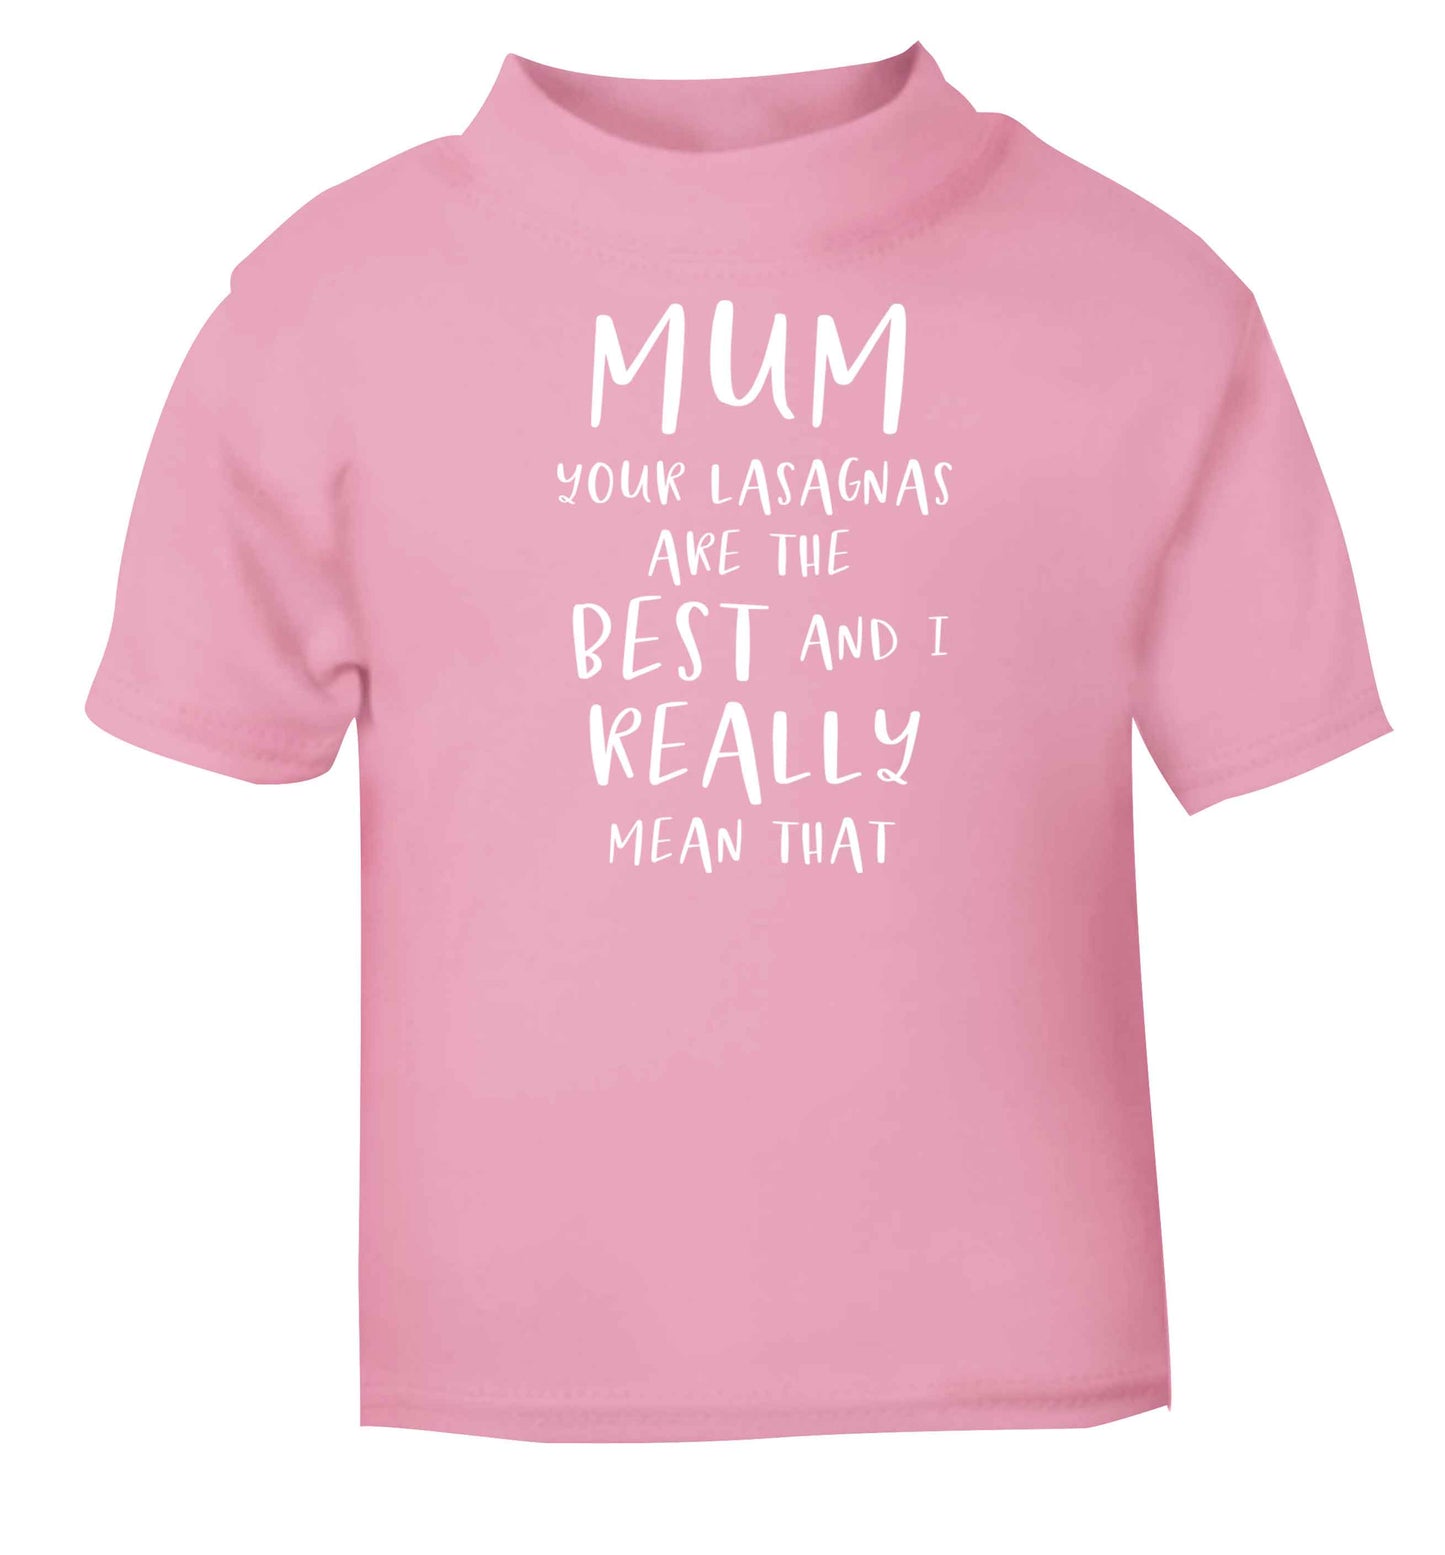 Funny gifts for your mum on mother's dayor her birthday! Mum your lasagnas are the best and I really mean that light pink baby toddler Tshirt 2 Years